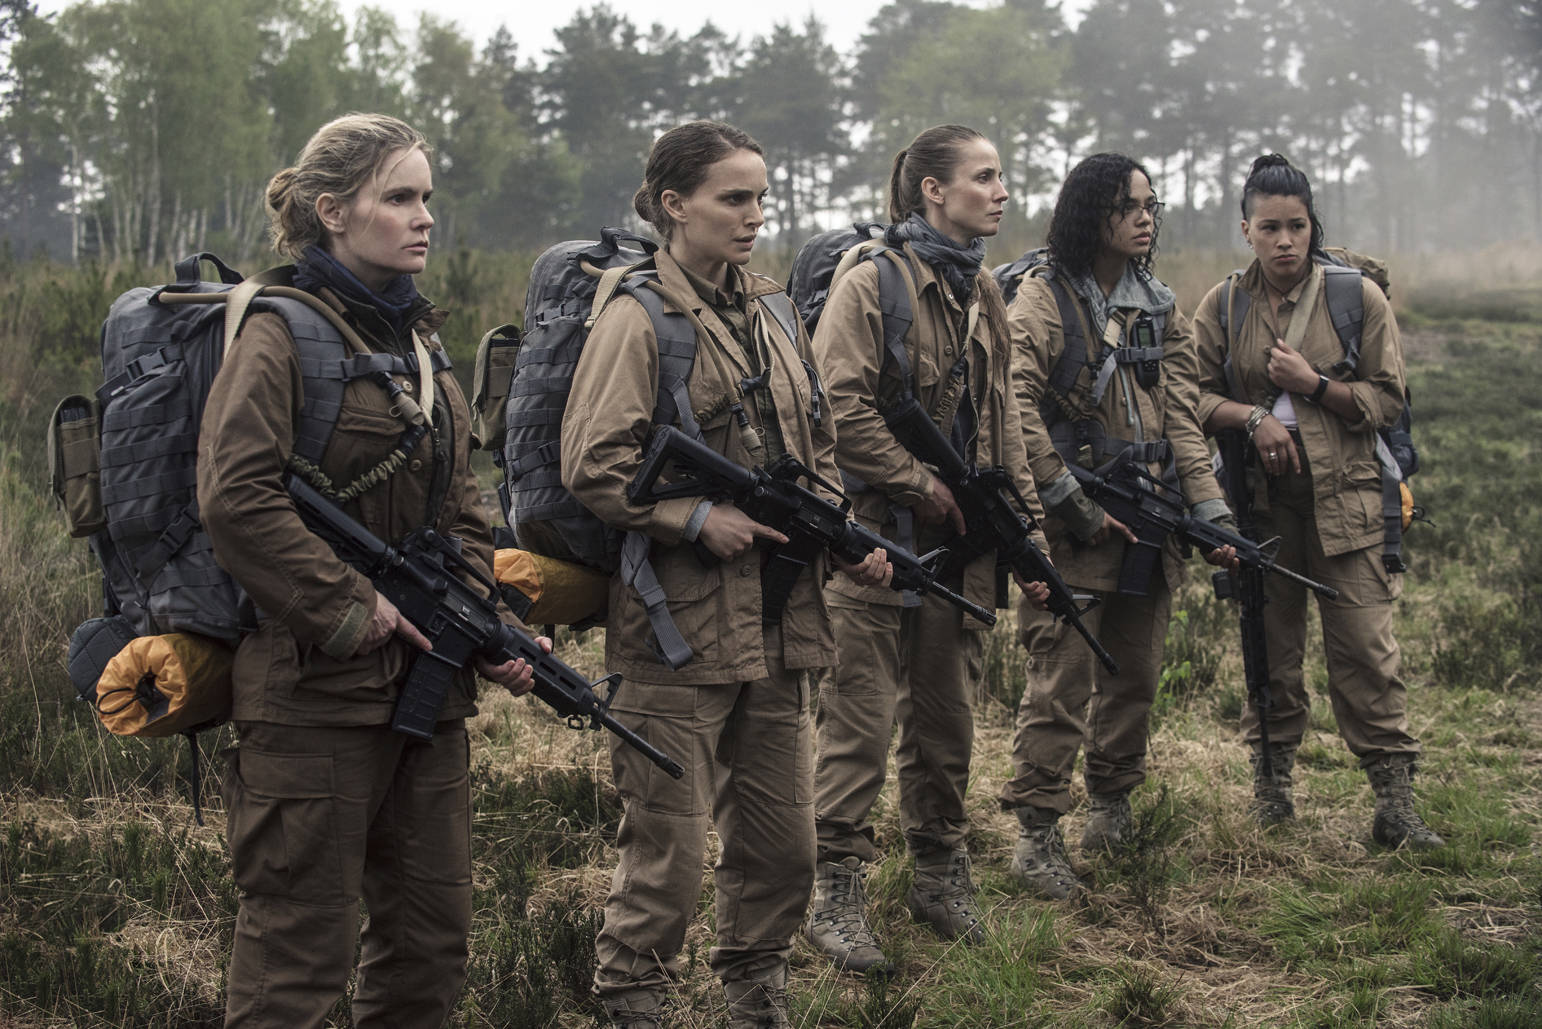 This image released by Paramount Pictures shows, from left, Jennifer Jason Leigh, Natalie Portman, Tuva Novotny, Tessa Thompson and Gina Rodriguez in a scene from “Annihilation.” (Peter Mountain/Paramount Pictures/Skydance via AP)